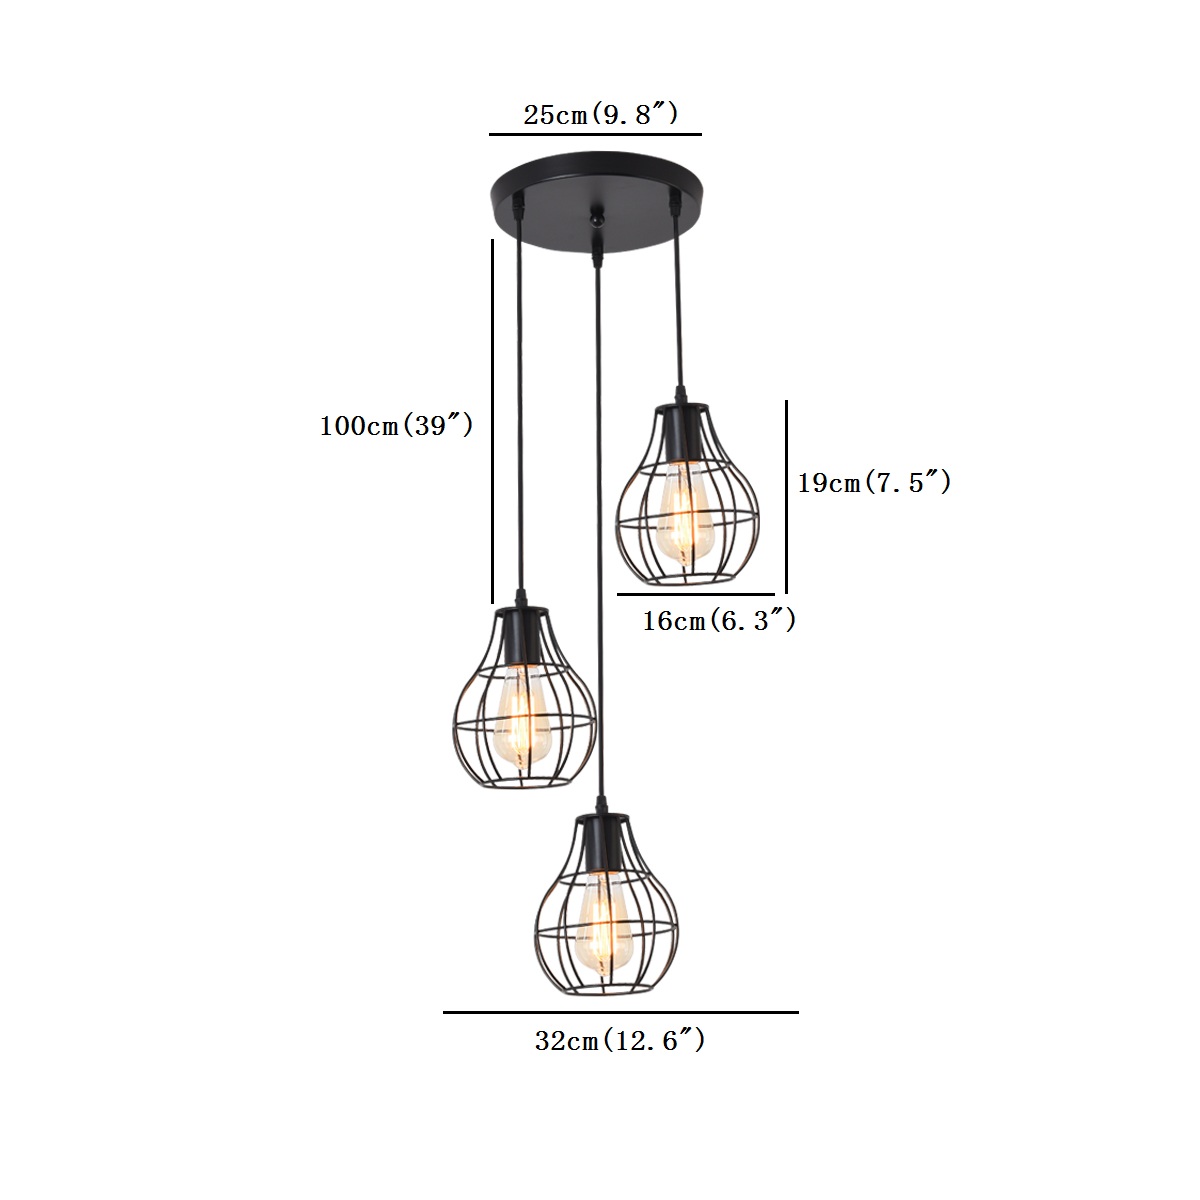 3-Lights-Industrial-Pendant-Lighting-Ceiling-Metal-Vintage-Hanging-Retro-Lamp-Without-Bulb-1710143-6